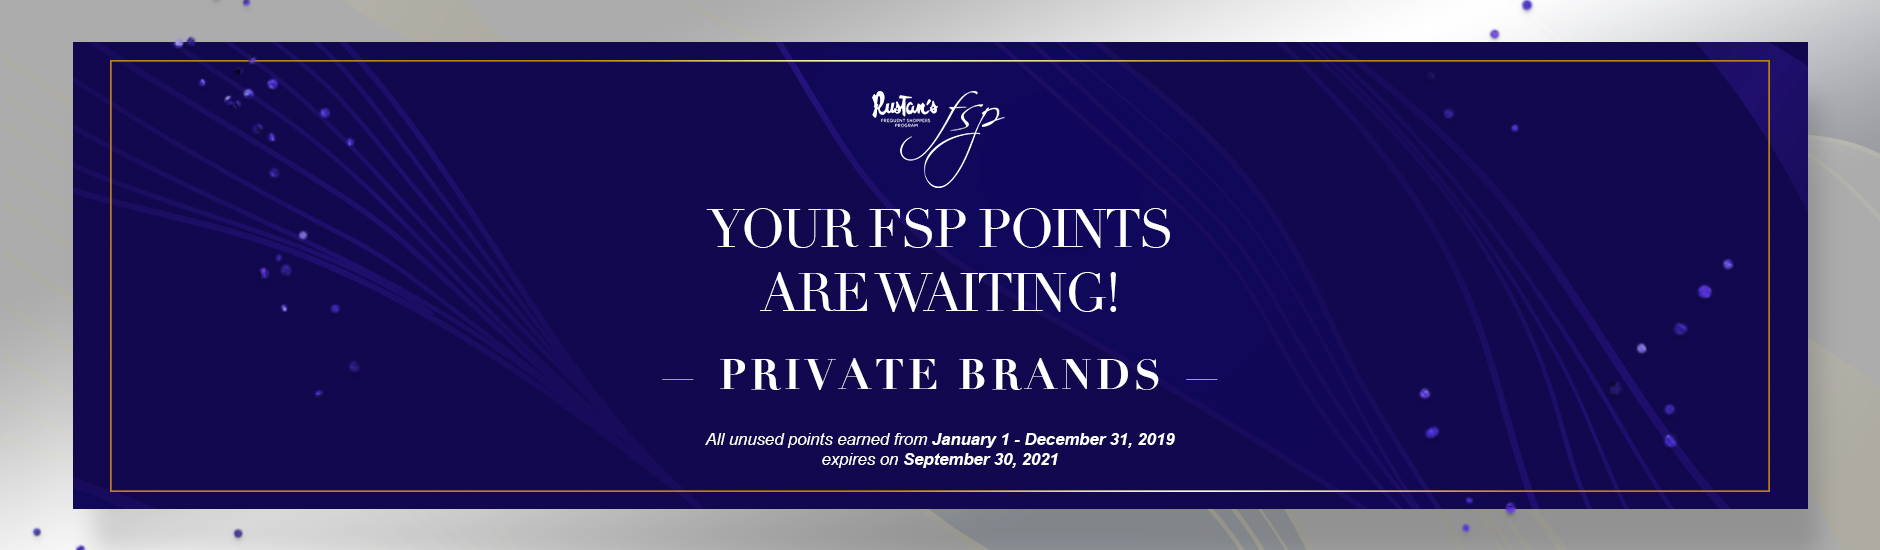 Your FSP Points are Waiting this September: Private Brands